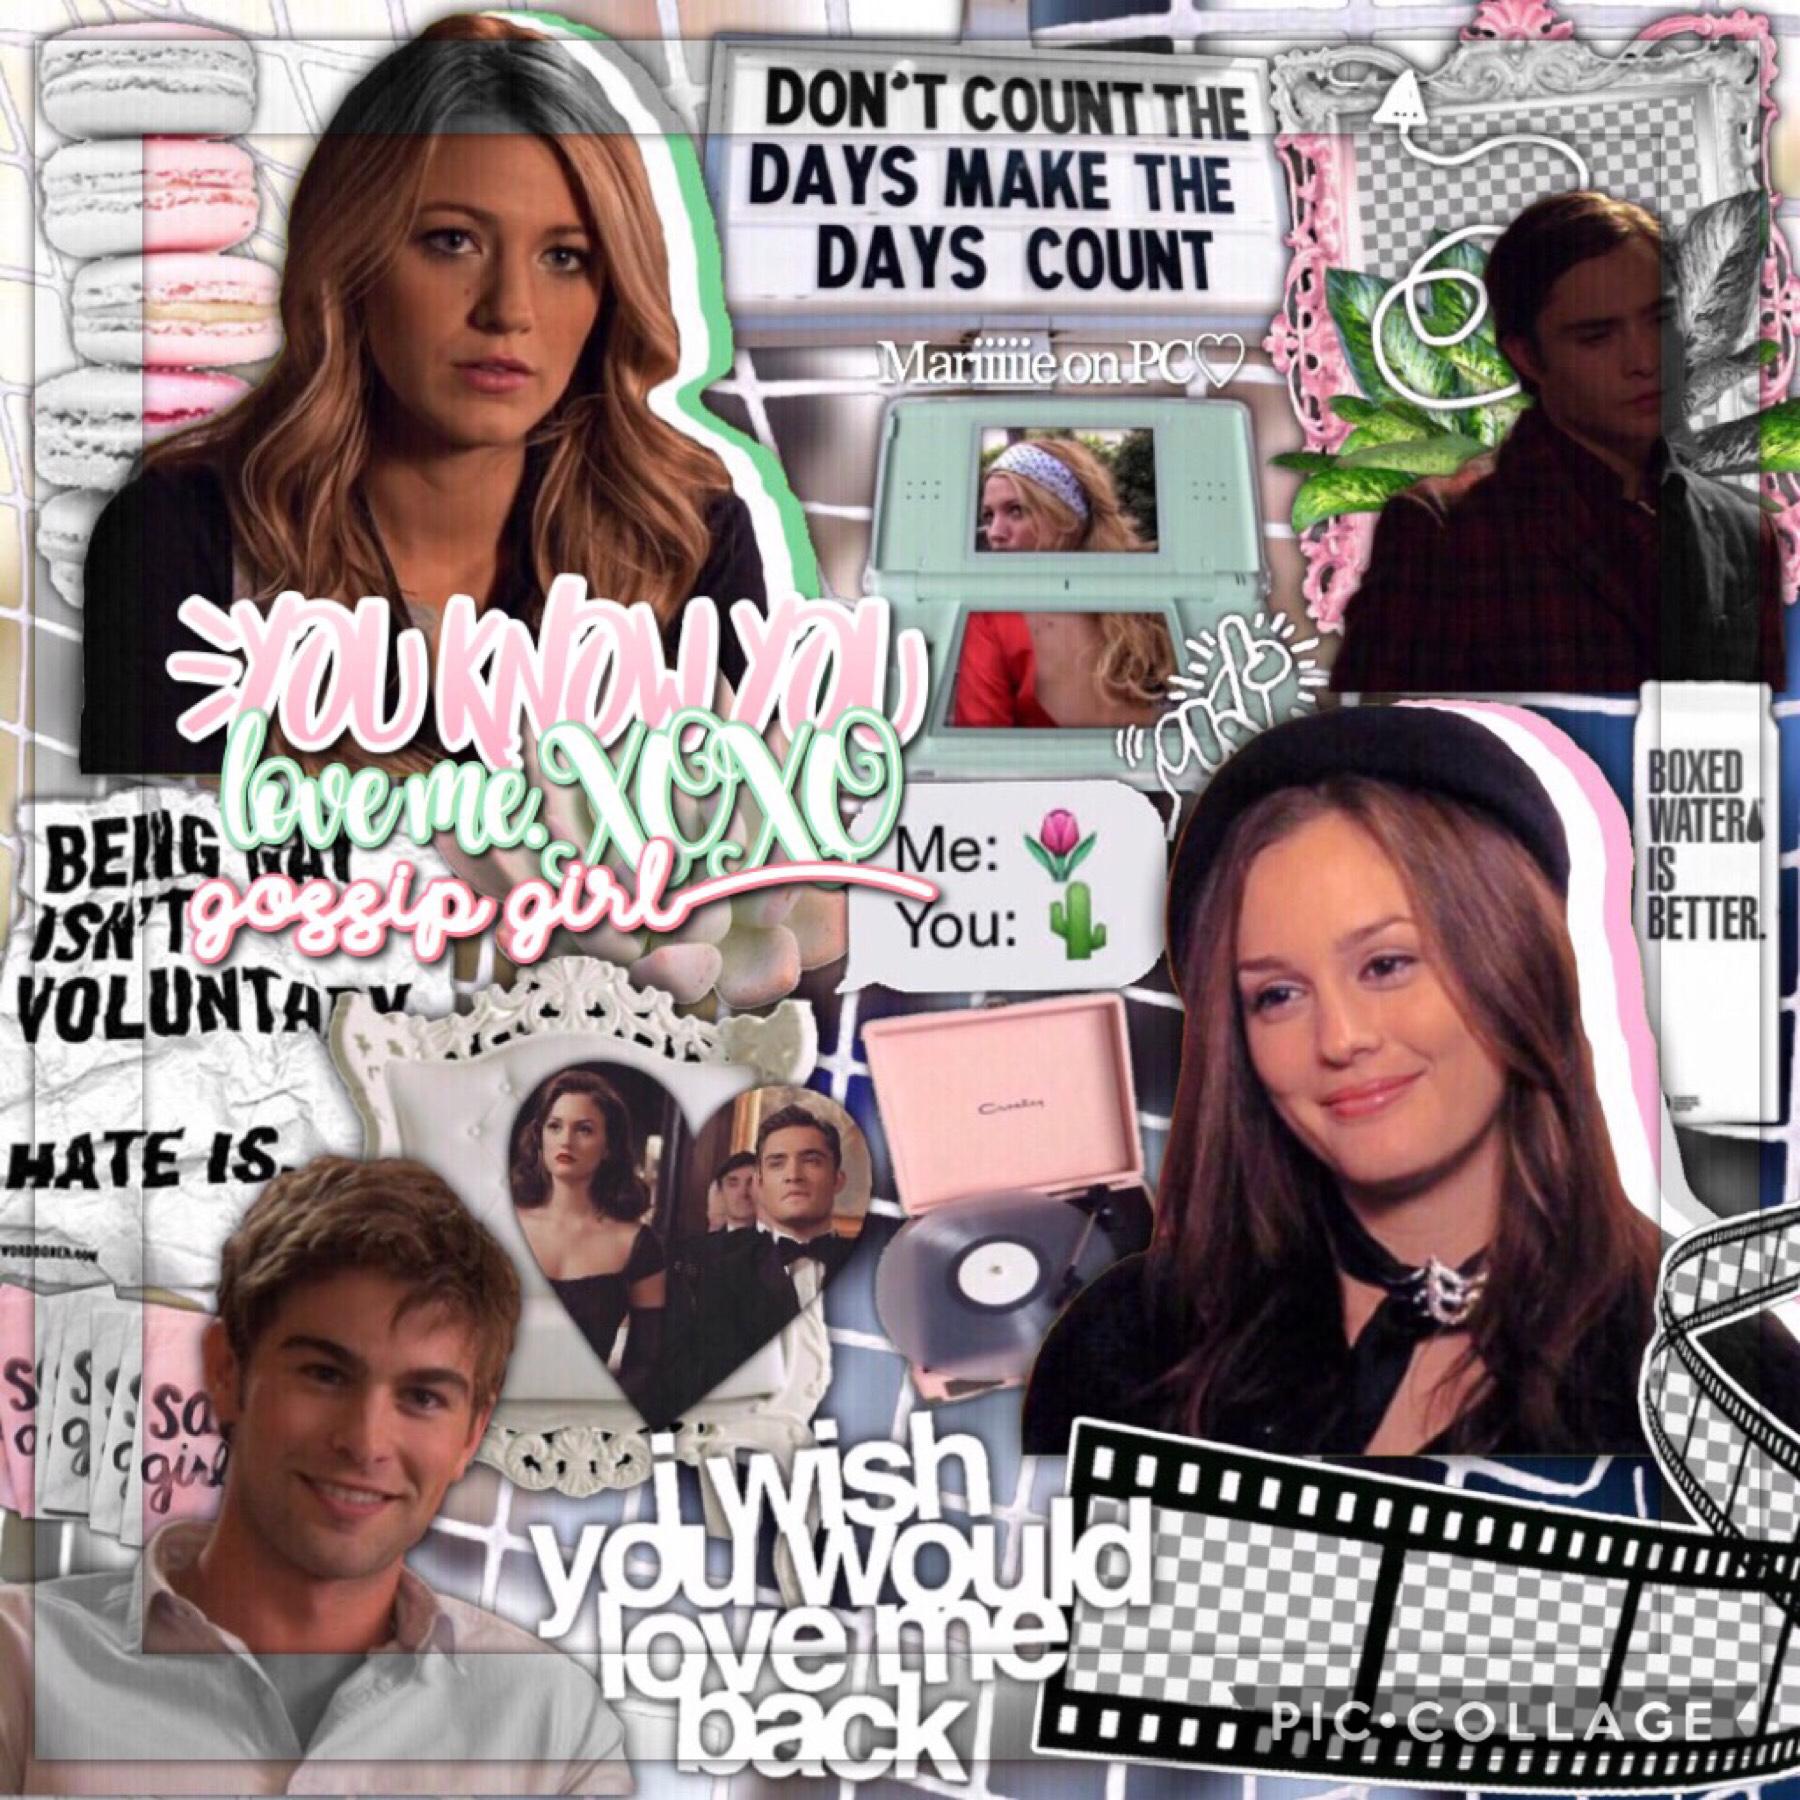 💋- T A P -💋

Gossip Girl edit! Hope you will like this!💗

First I thought it was not very good, but then i started watching it and... I love it!😂❤️❤️ 

QOTD - Fav ship of the show?

AOTD - Chuck x Blair💖💖

